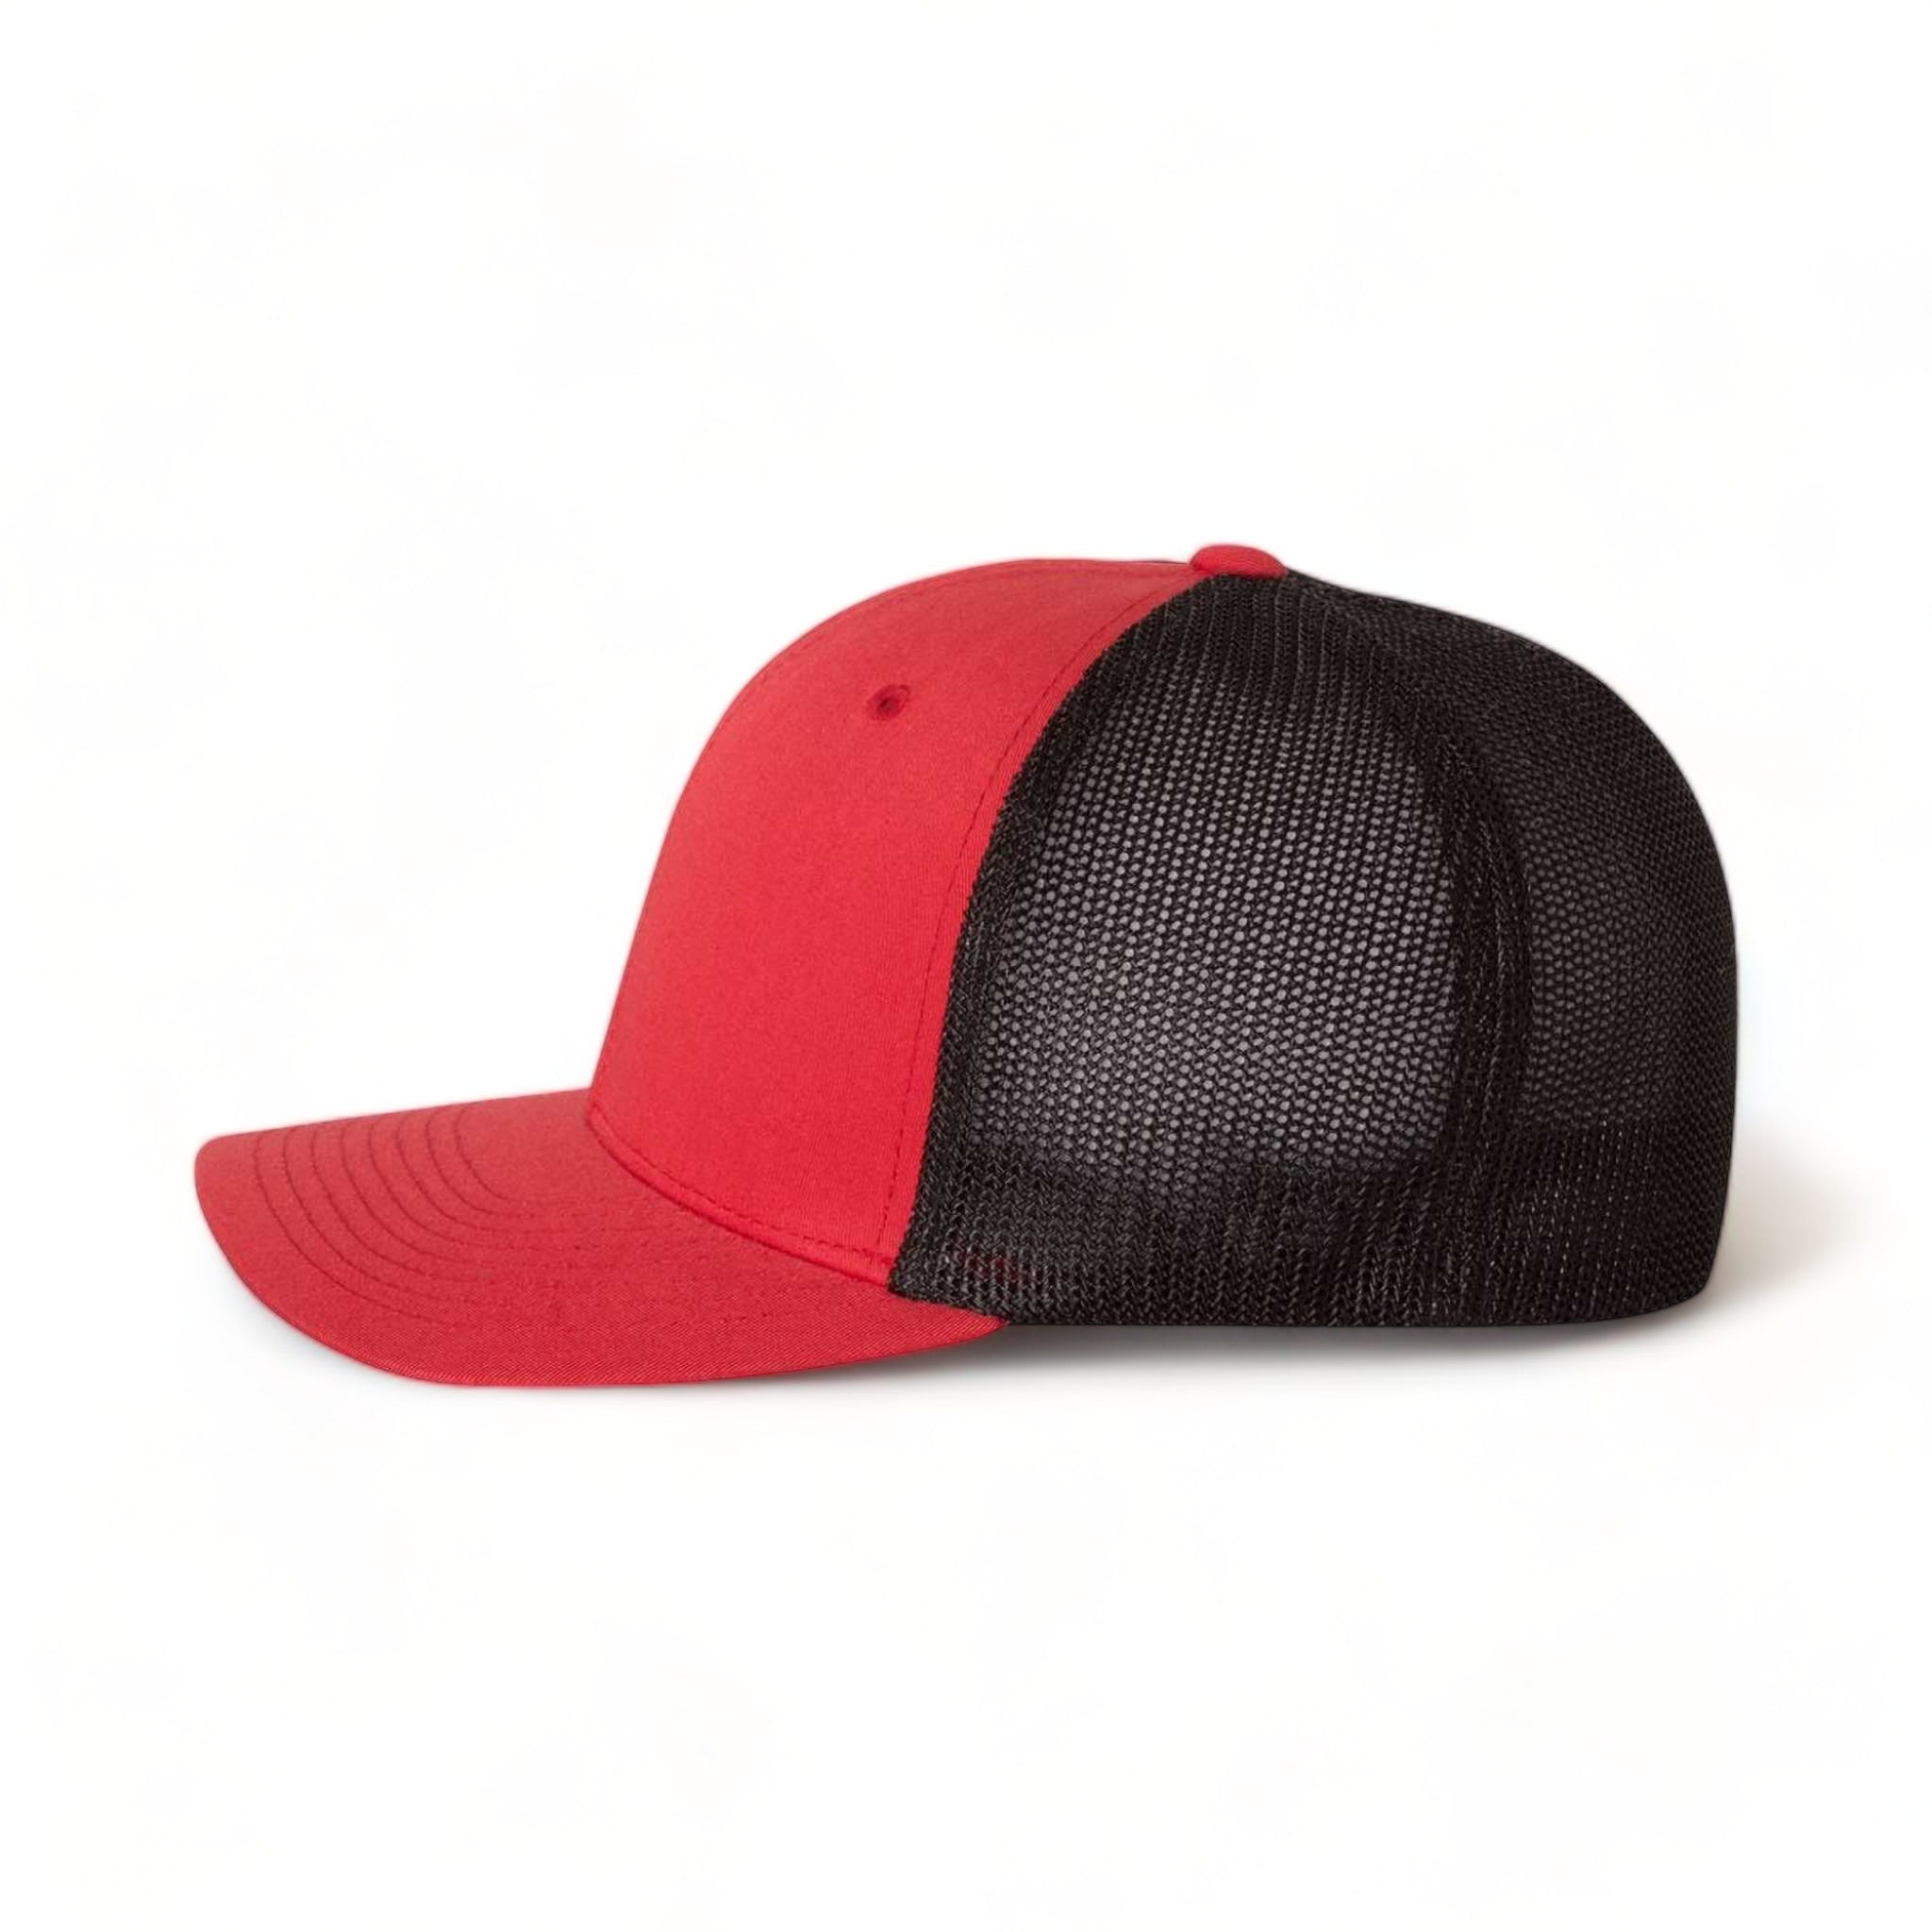 Side view of Flexfit 6511 custom hat in red and black